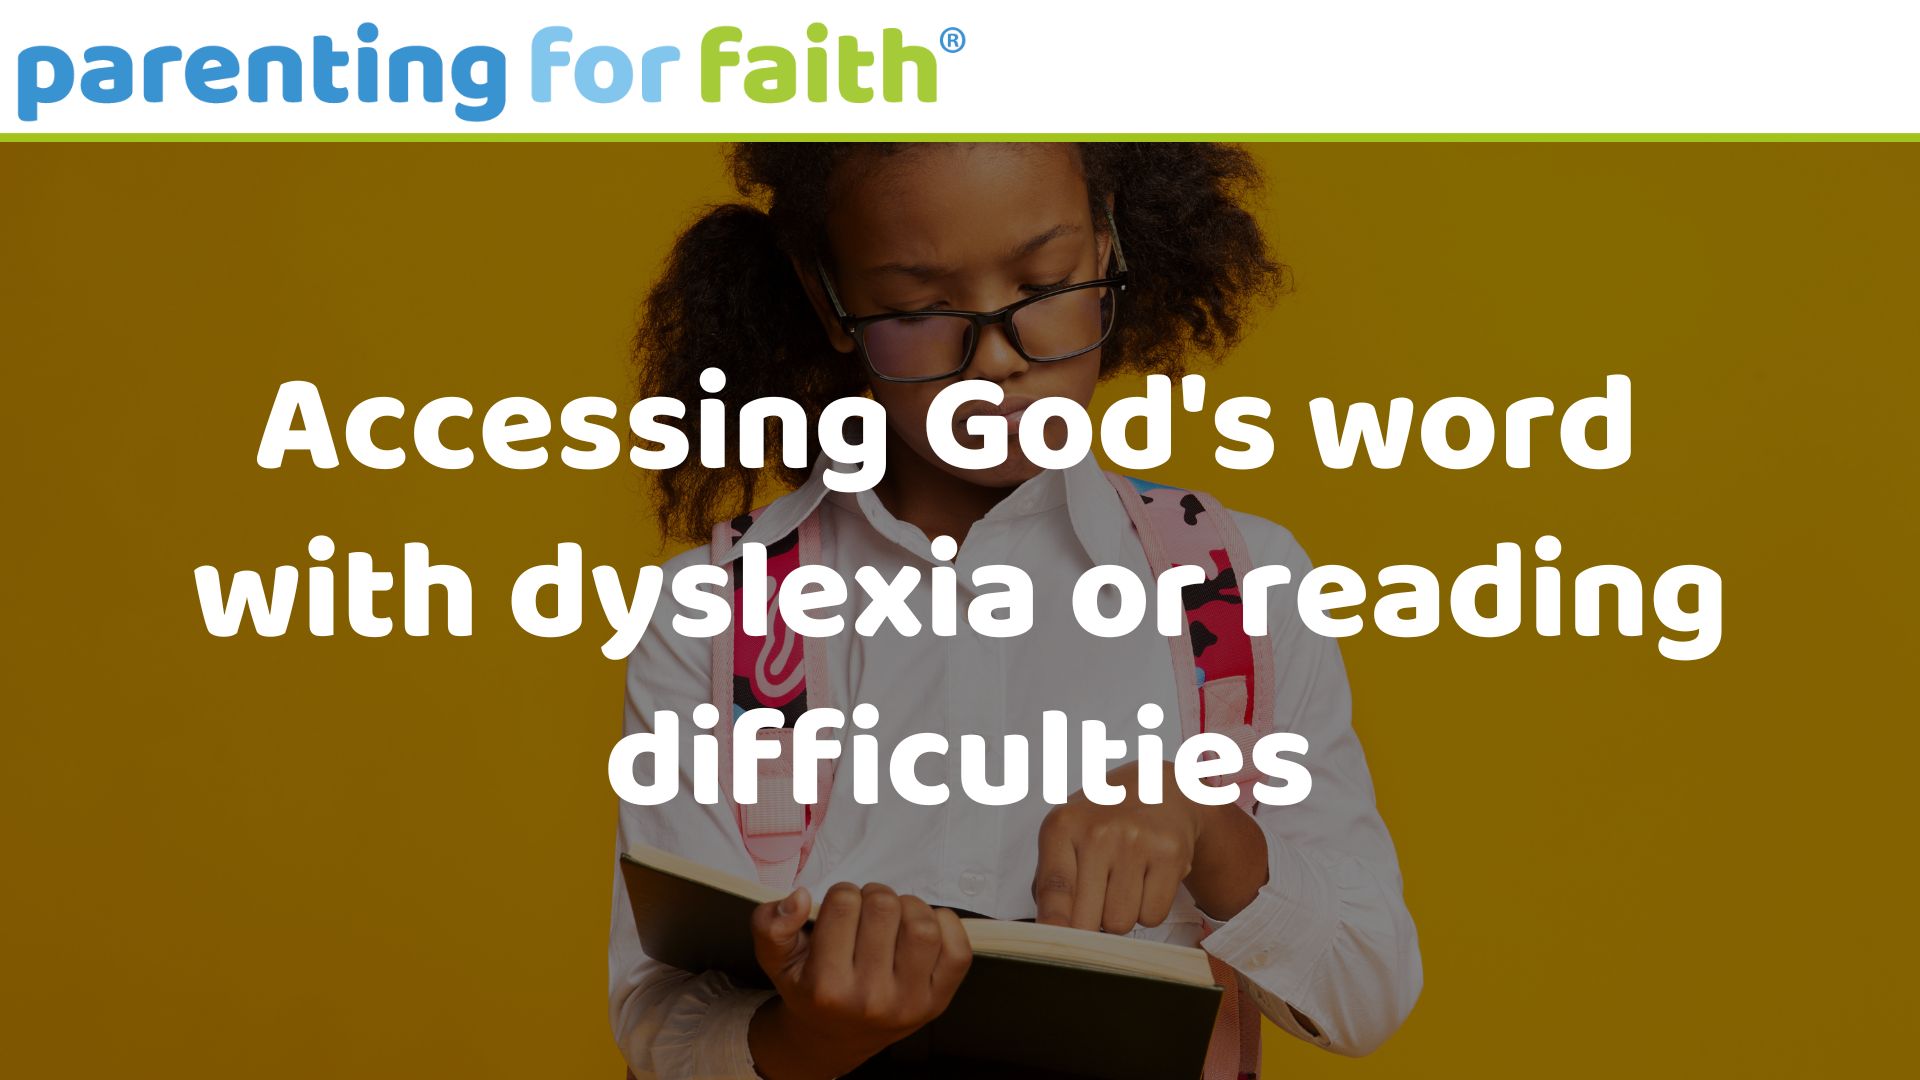 Accessing God's word with dyslexia or reading difficulties